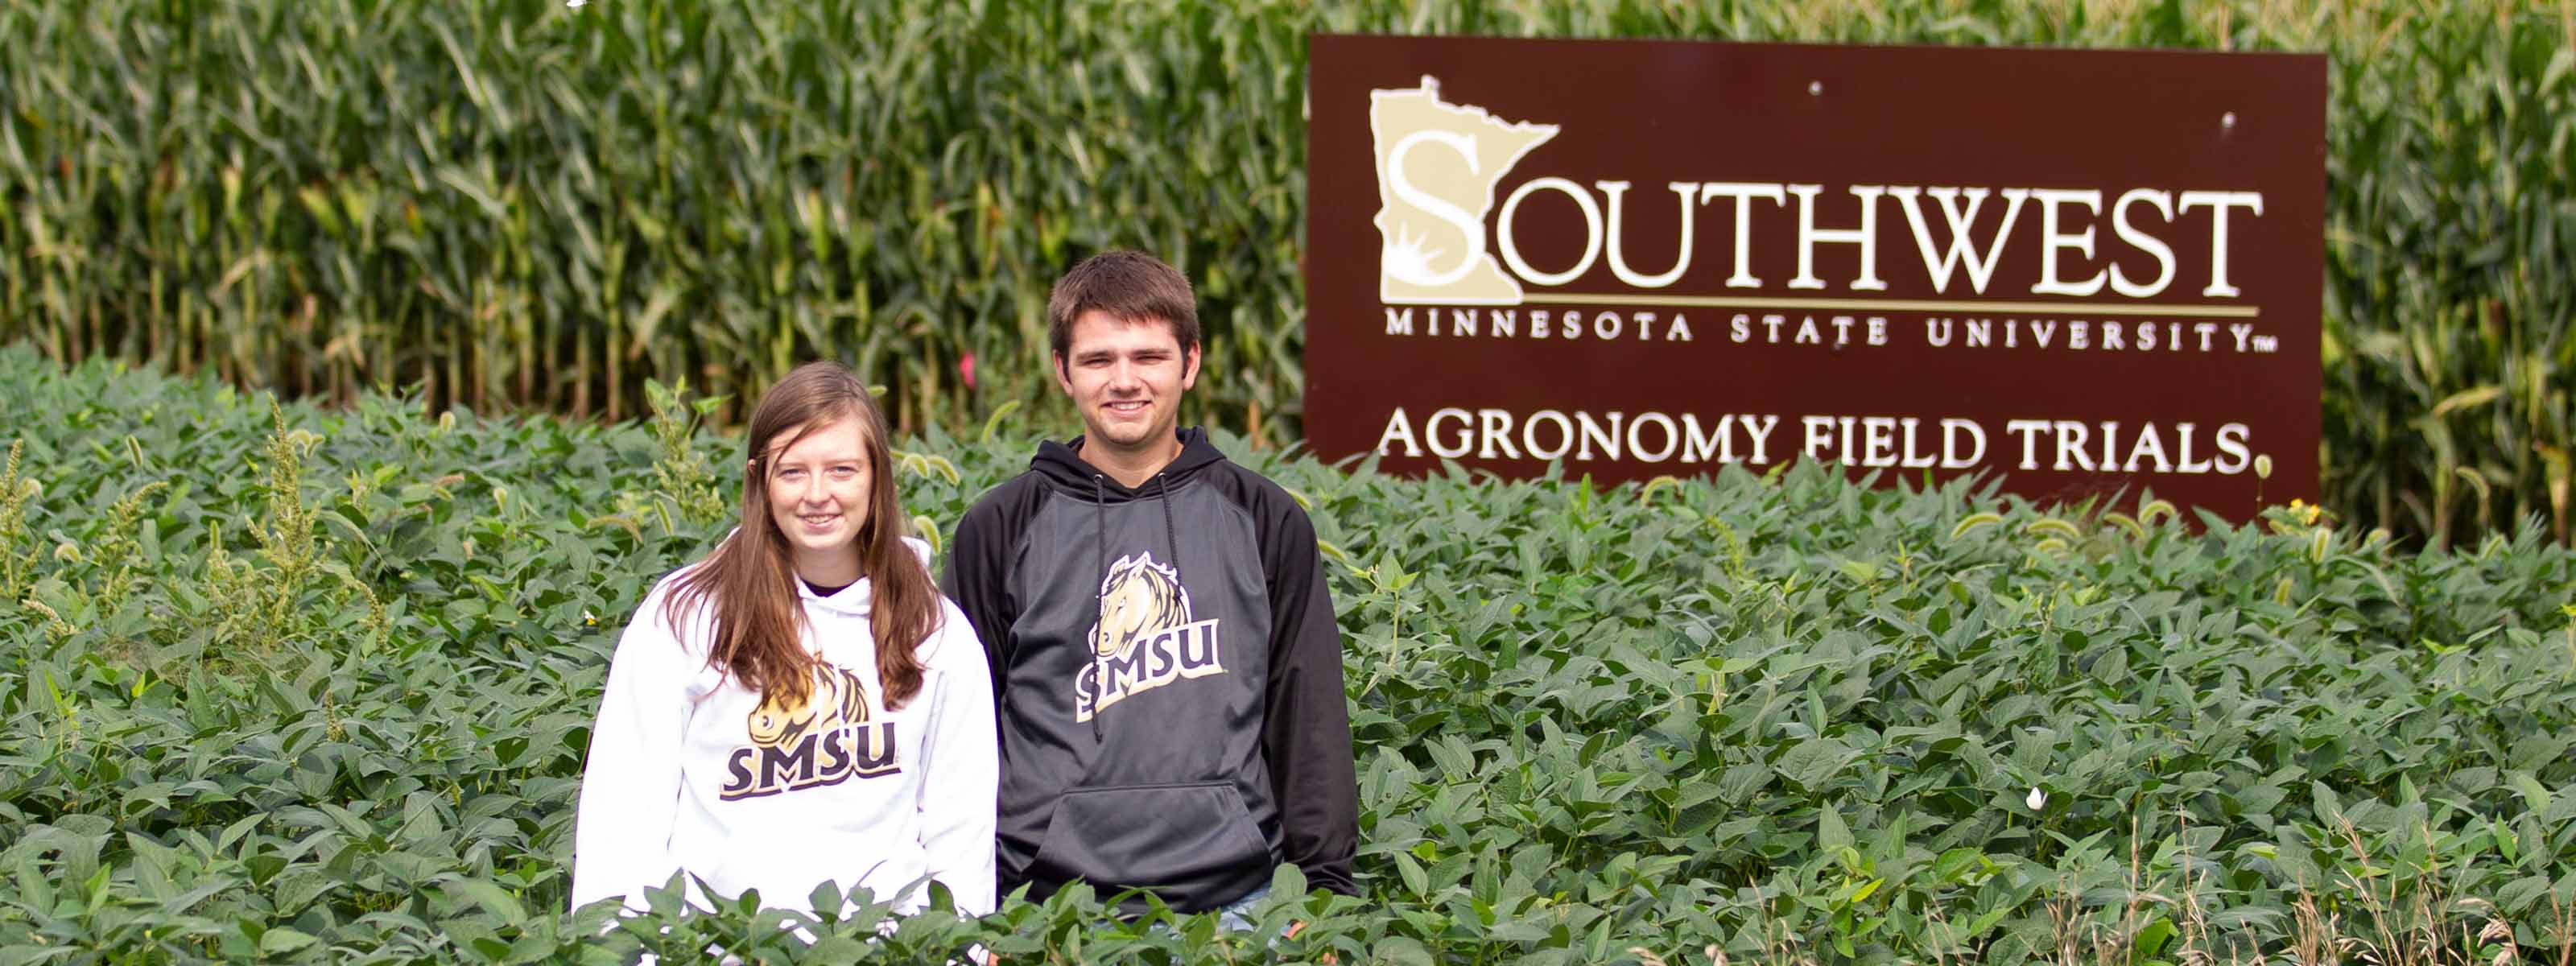 Study Agriculture At SMSU!